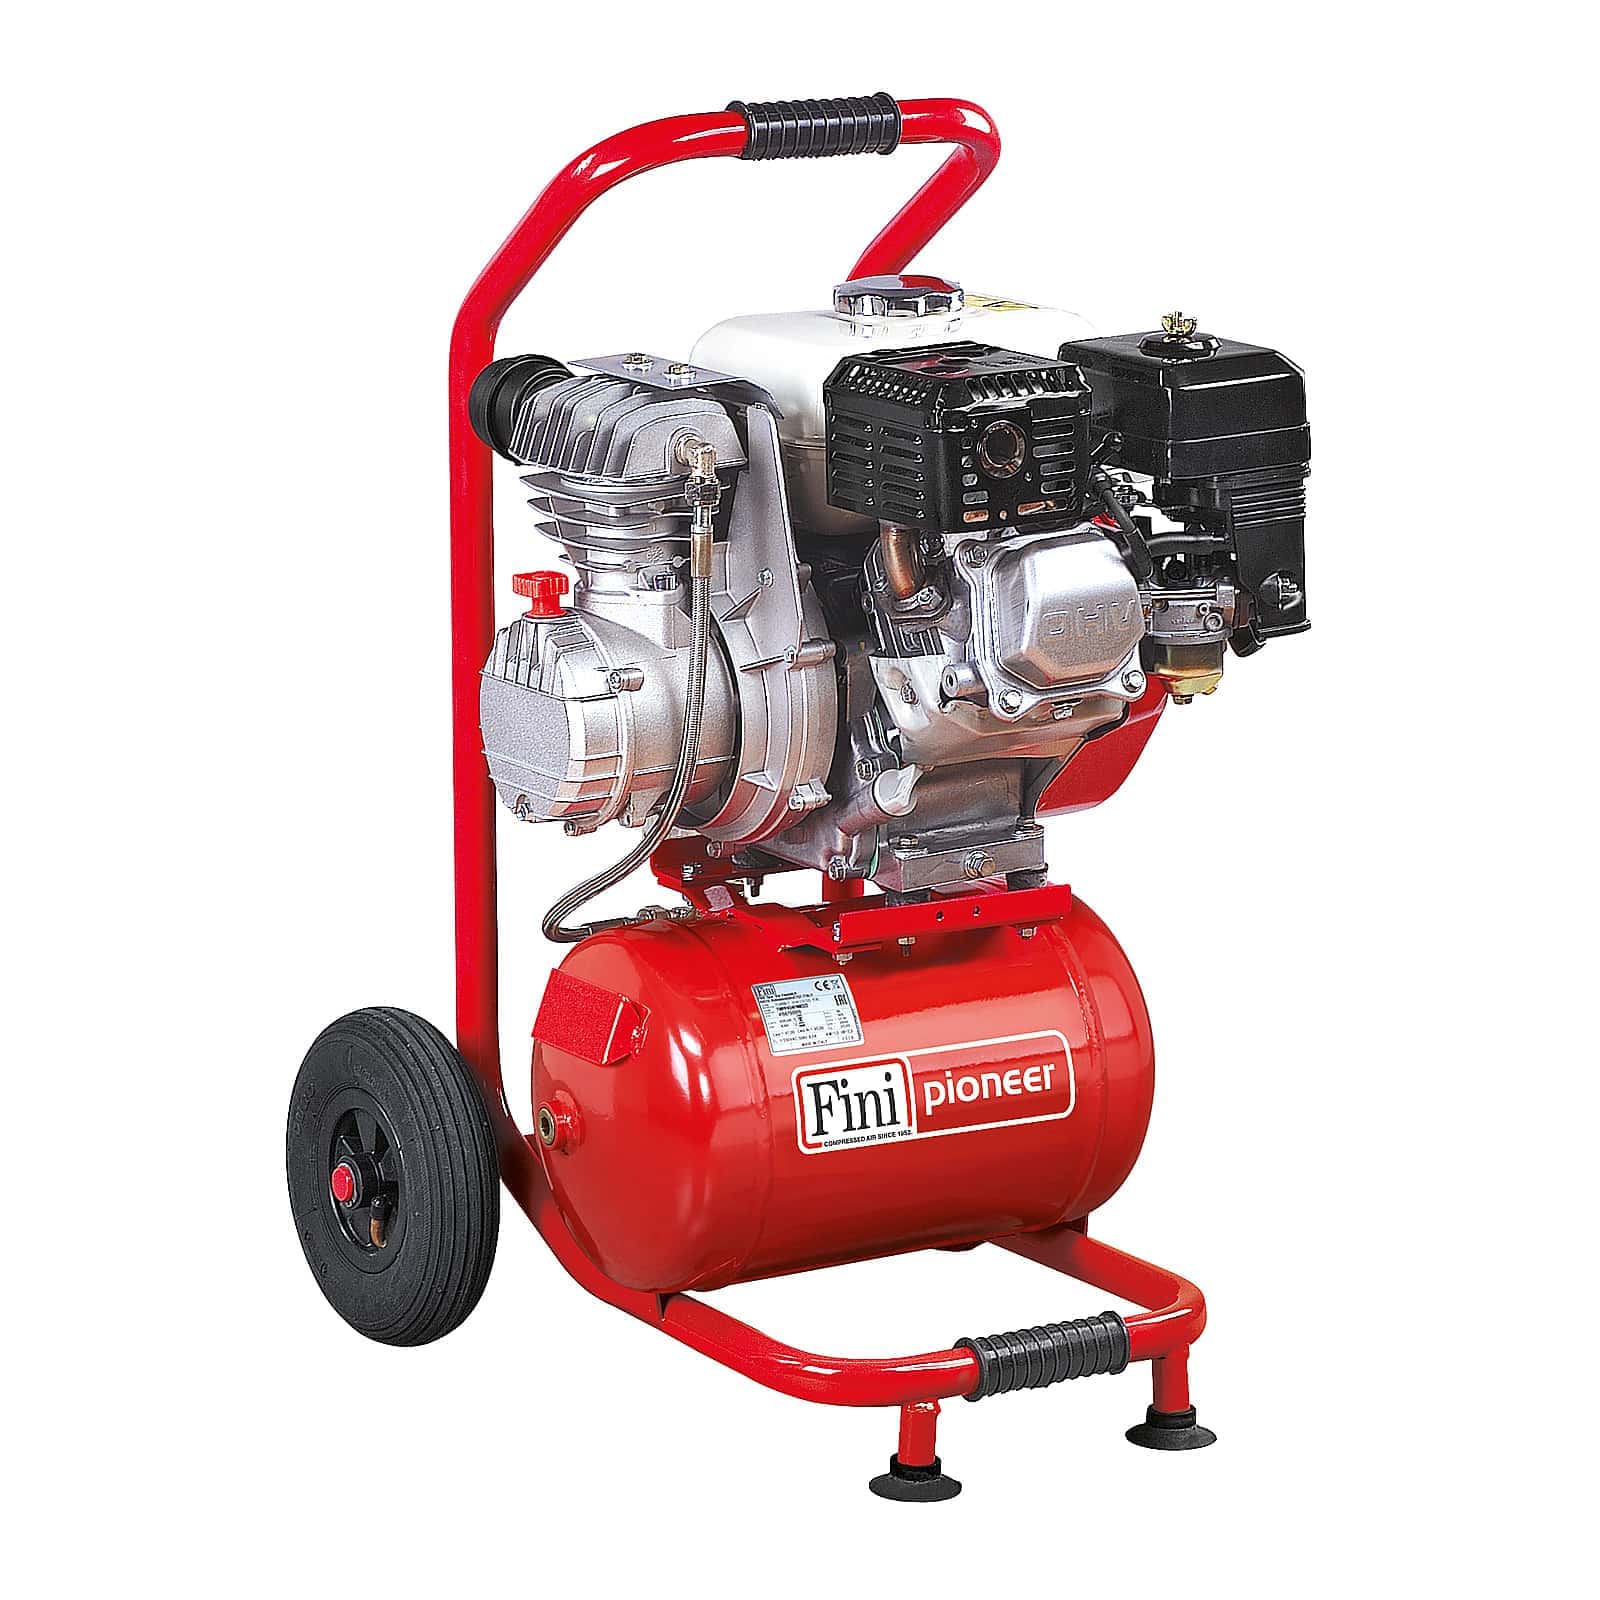 Pioneer 236-4S Honda Professional petrol motor-compressor with Honda engine, for working environments without electricity.